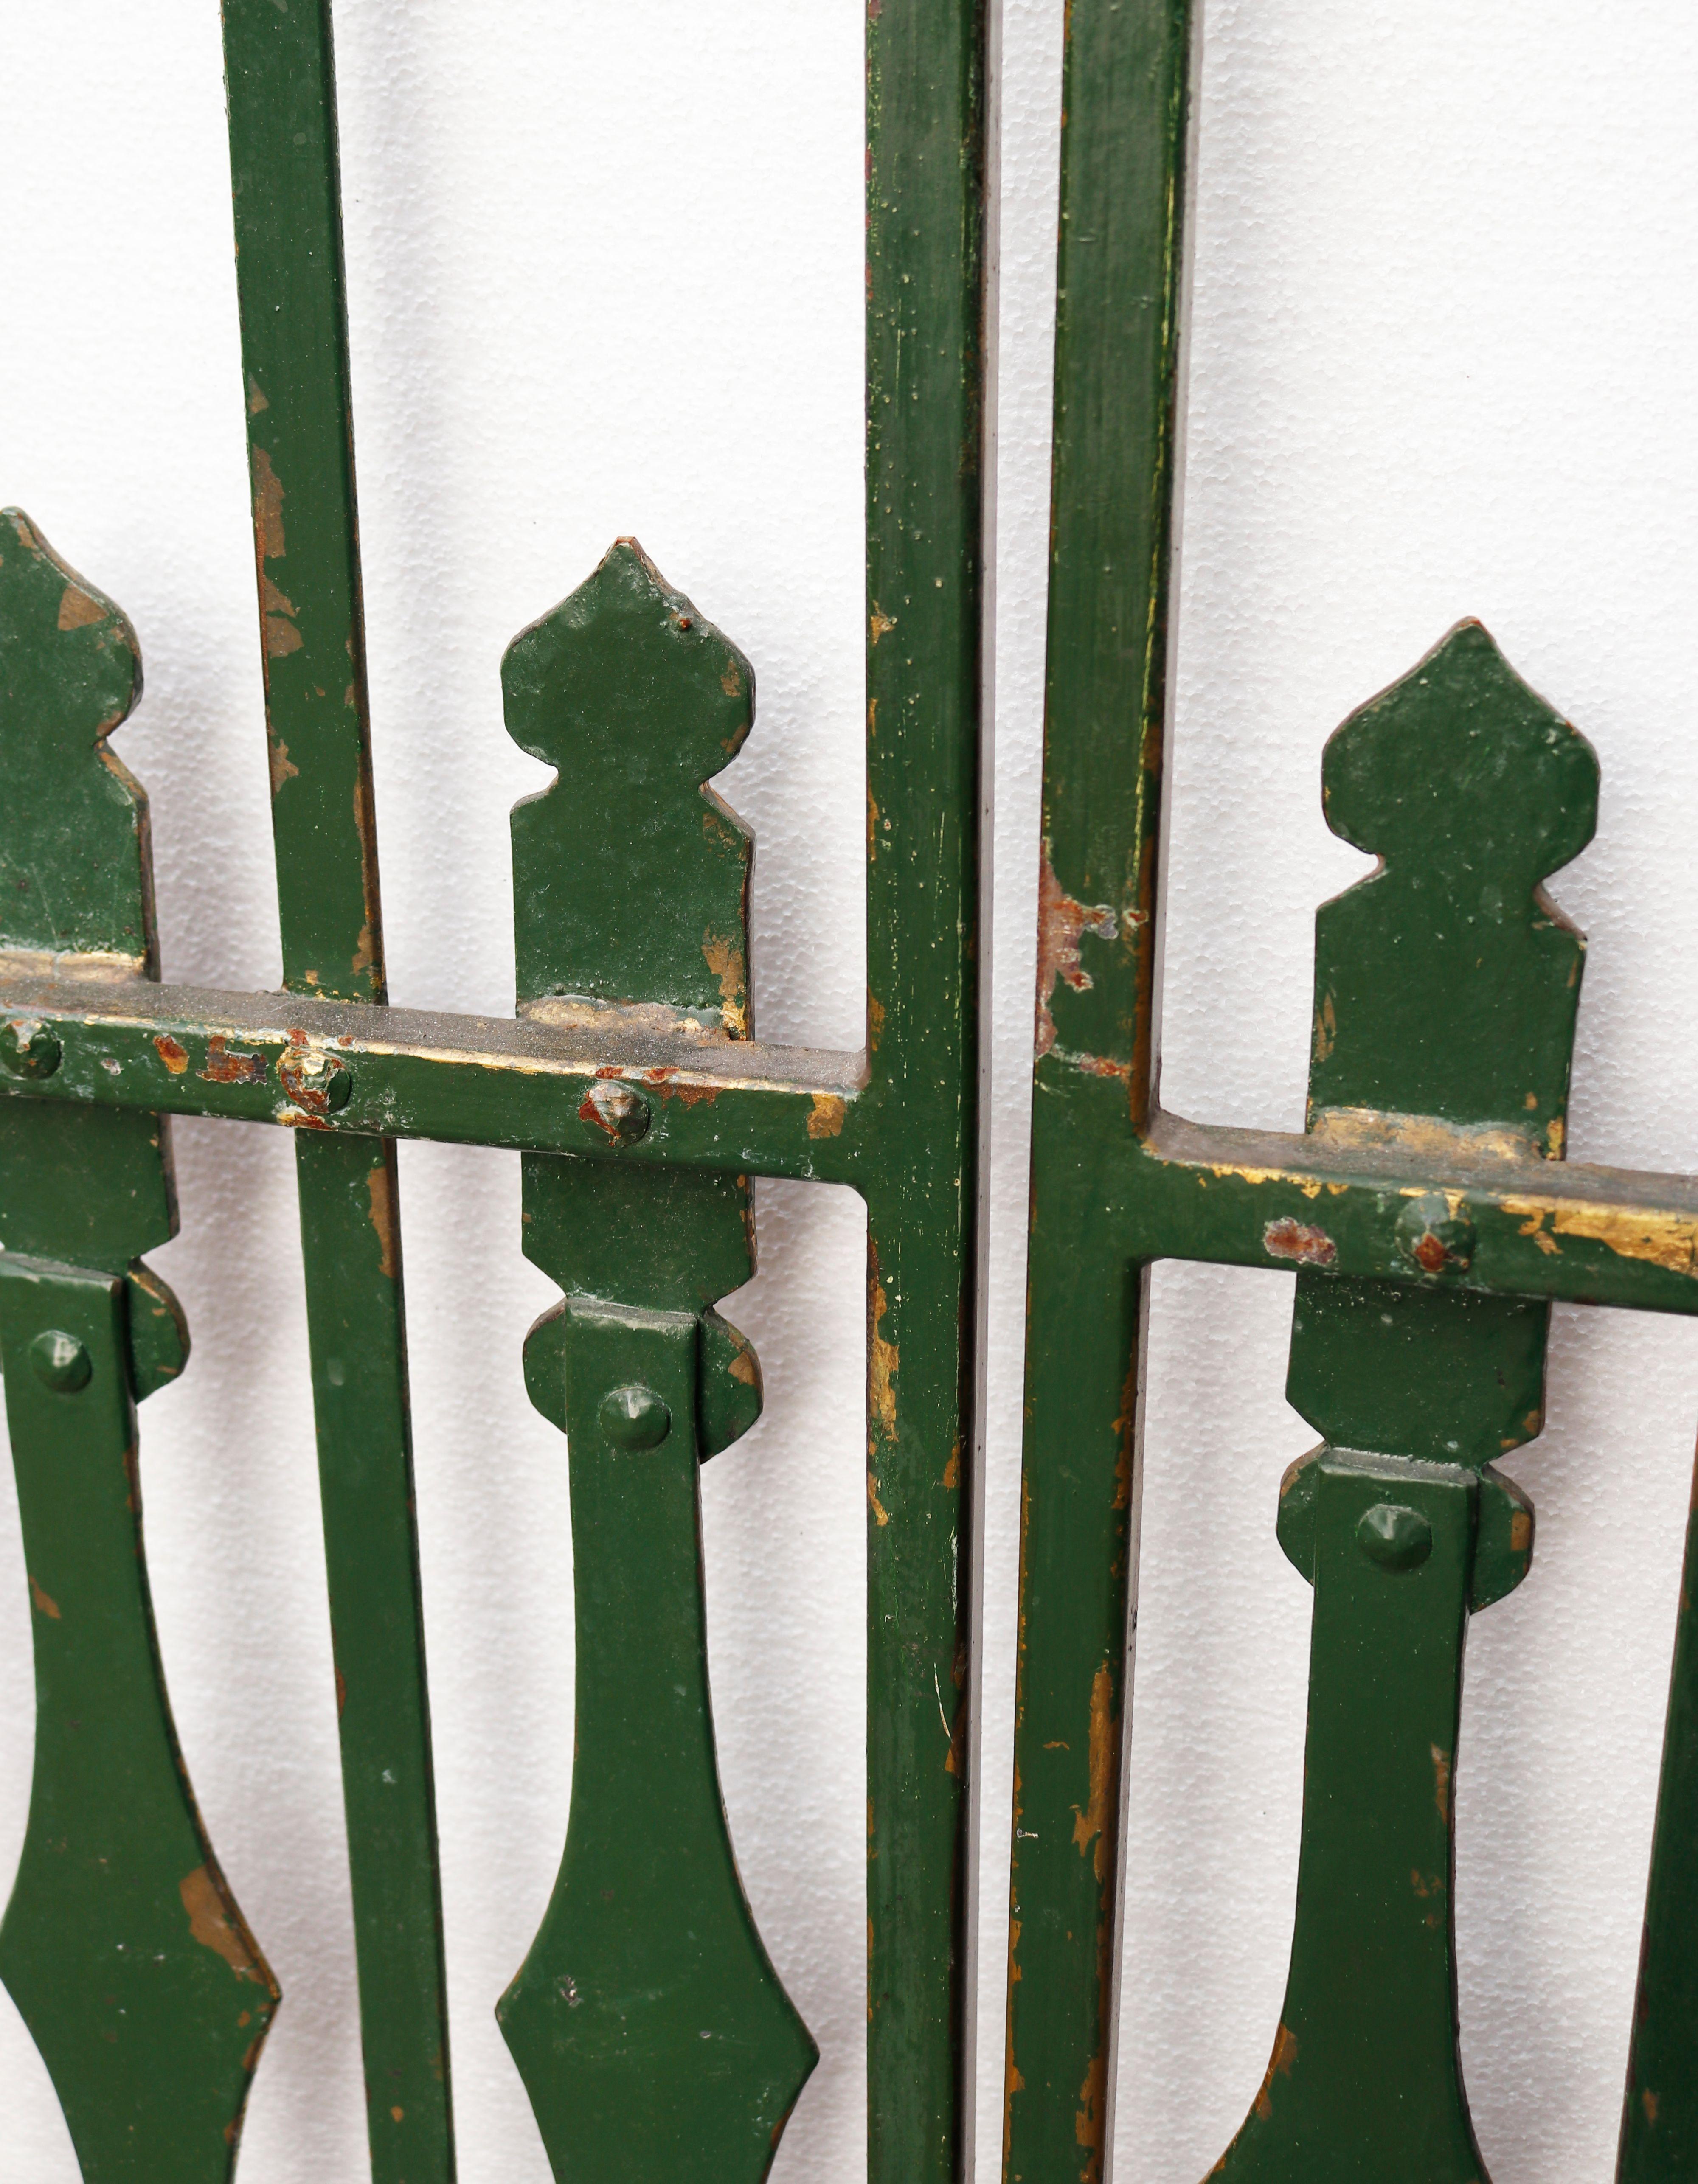 Set of Reclaimed Iron Gates. These are painted to simulate bronze. We have a second pair available.

Additional Dimensions

For an opening of approx. 83 cm